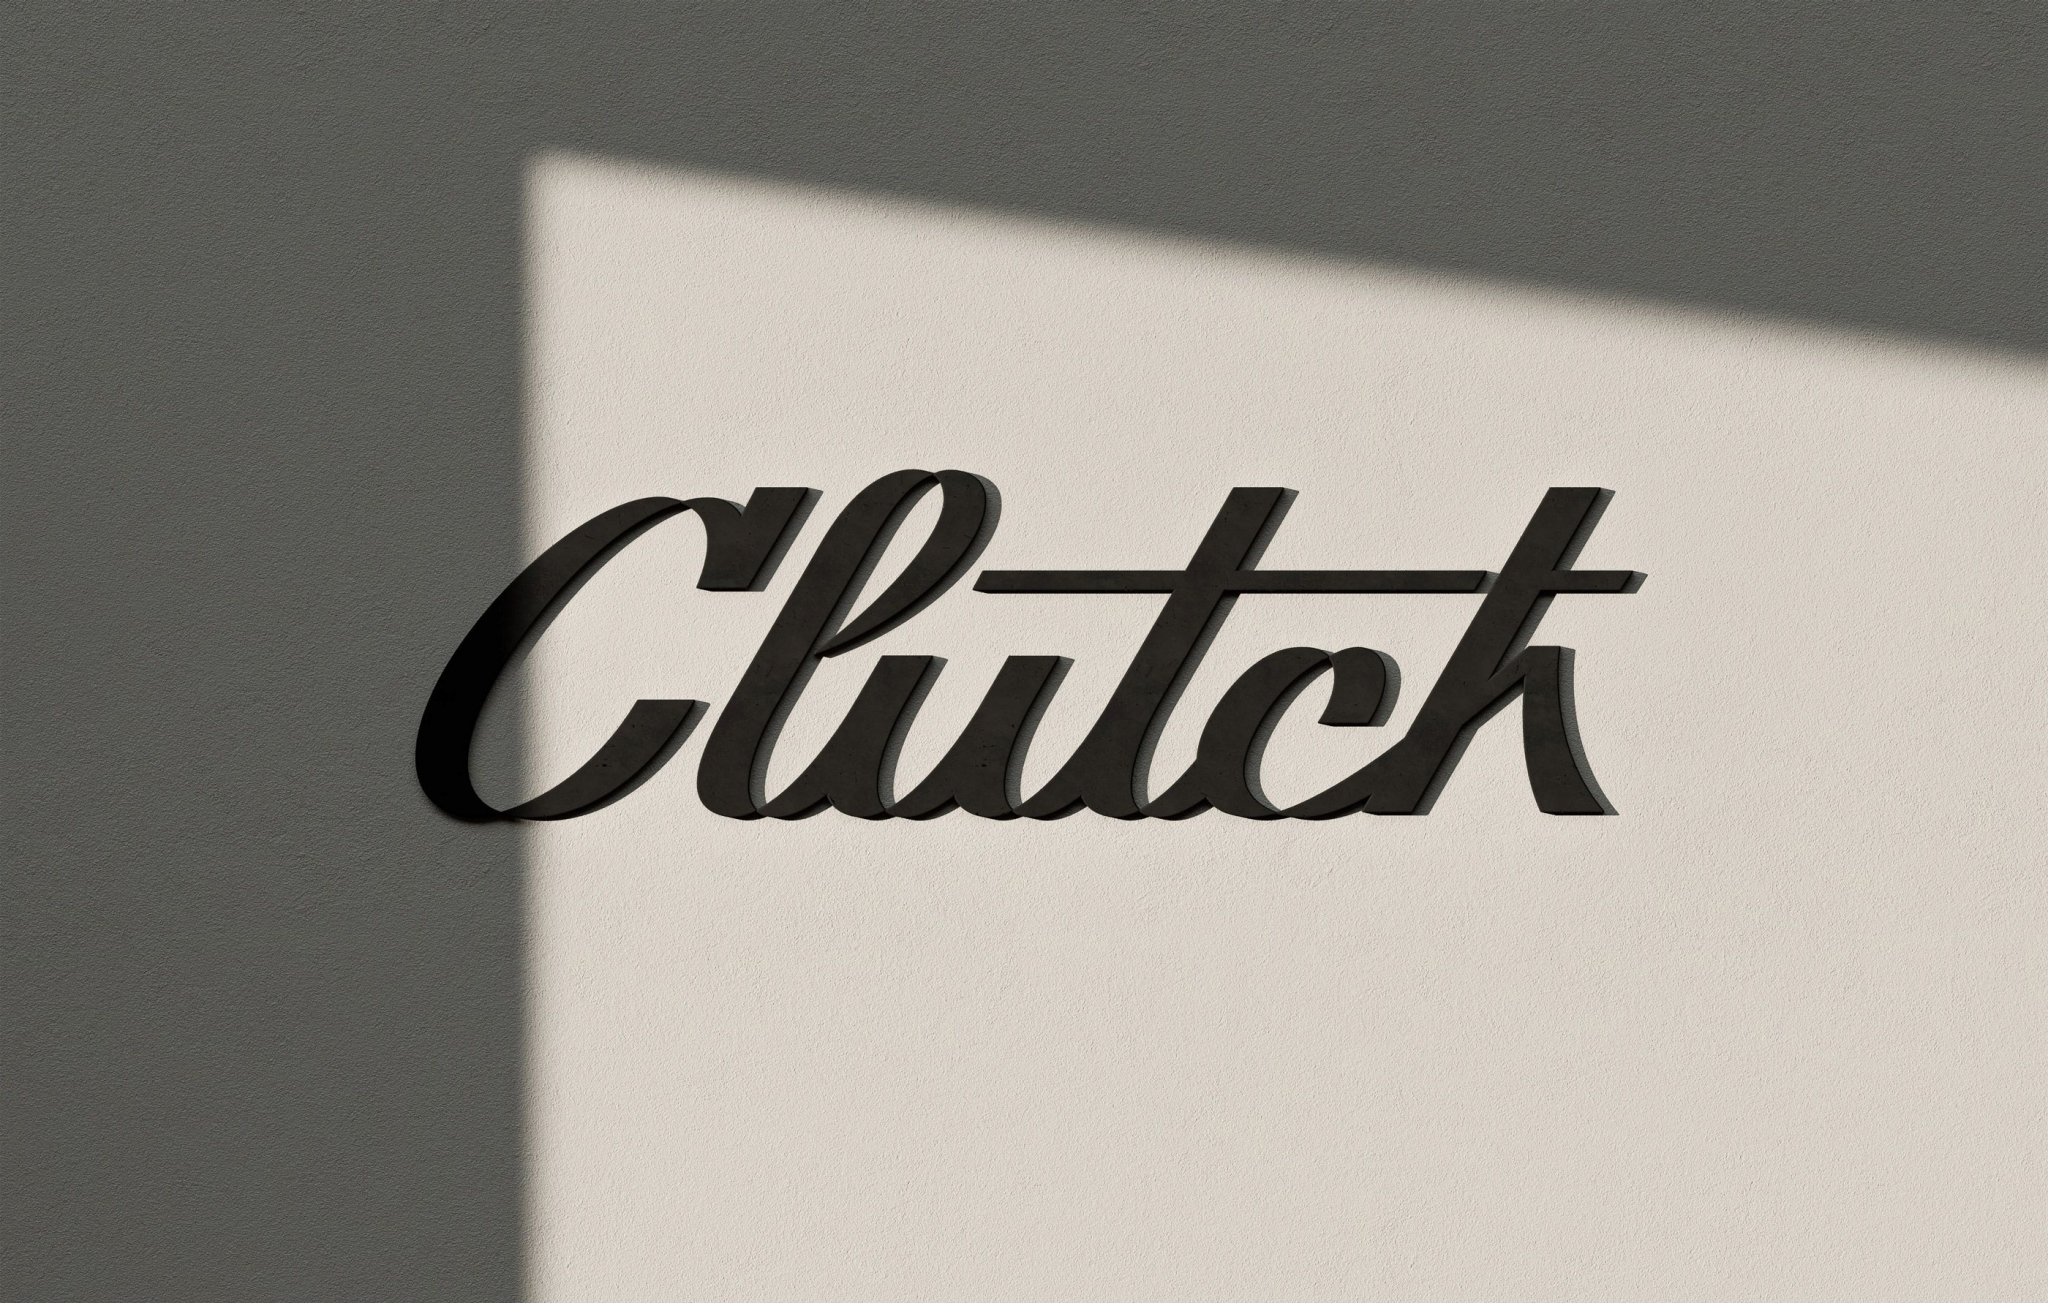 Logotype by Parker Studio for modern Texas automotive shop and mechanics Clutch